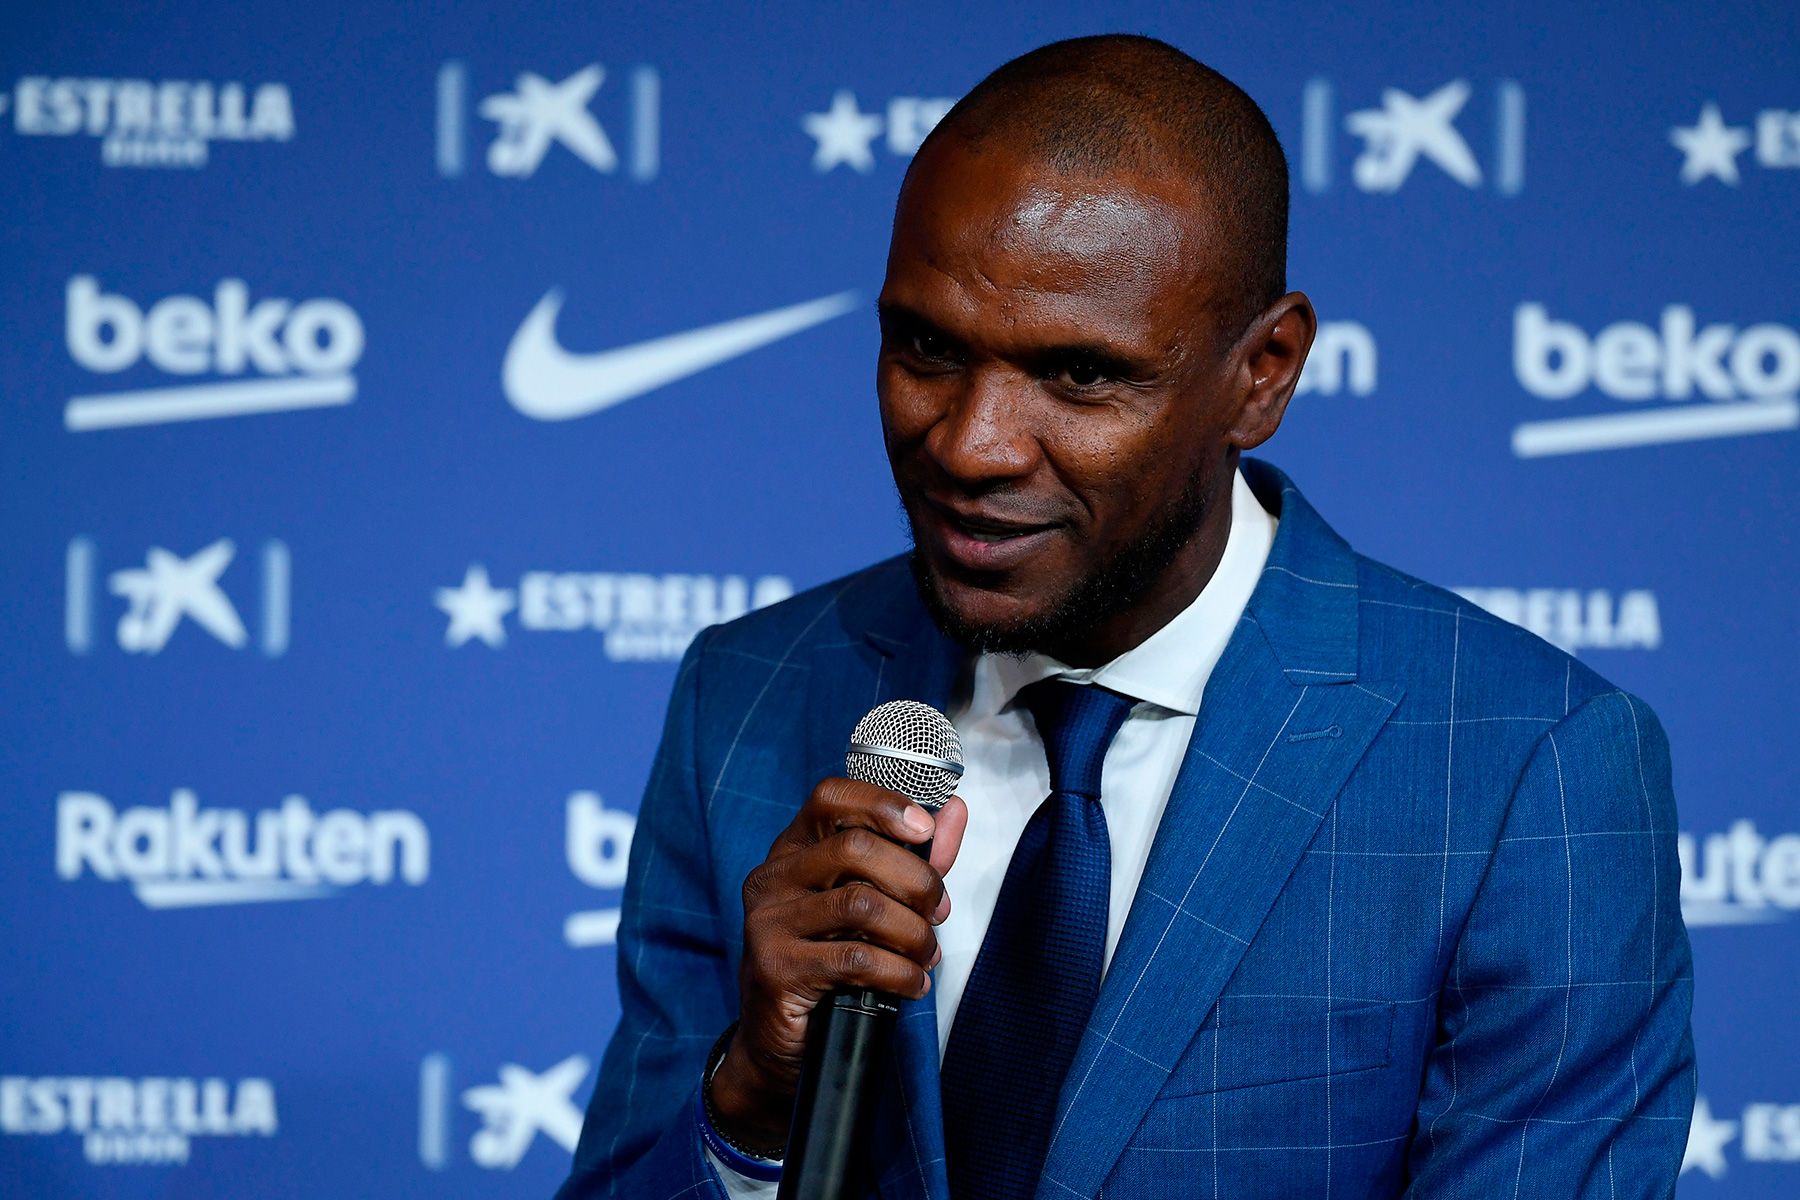 Abidal in the act of presentation of Griezmann